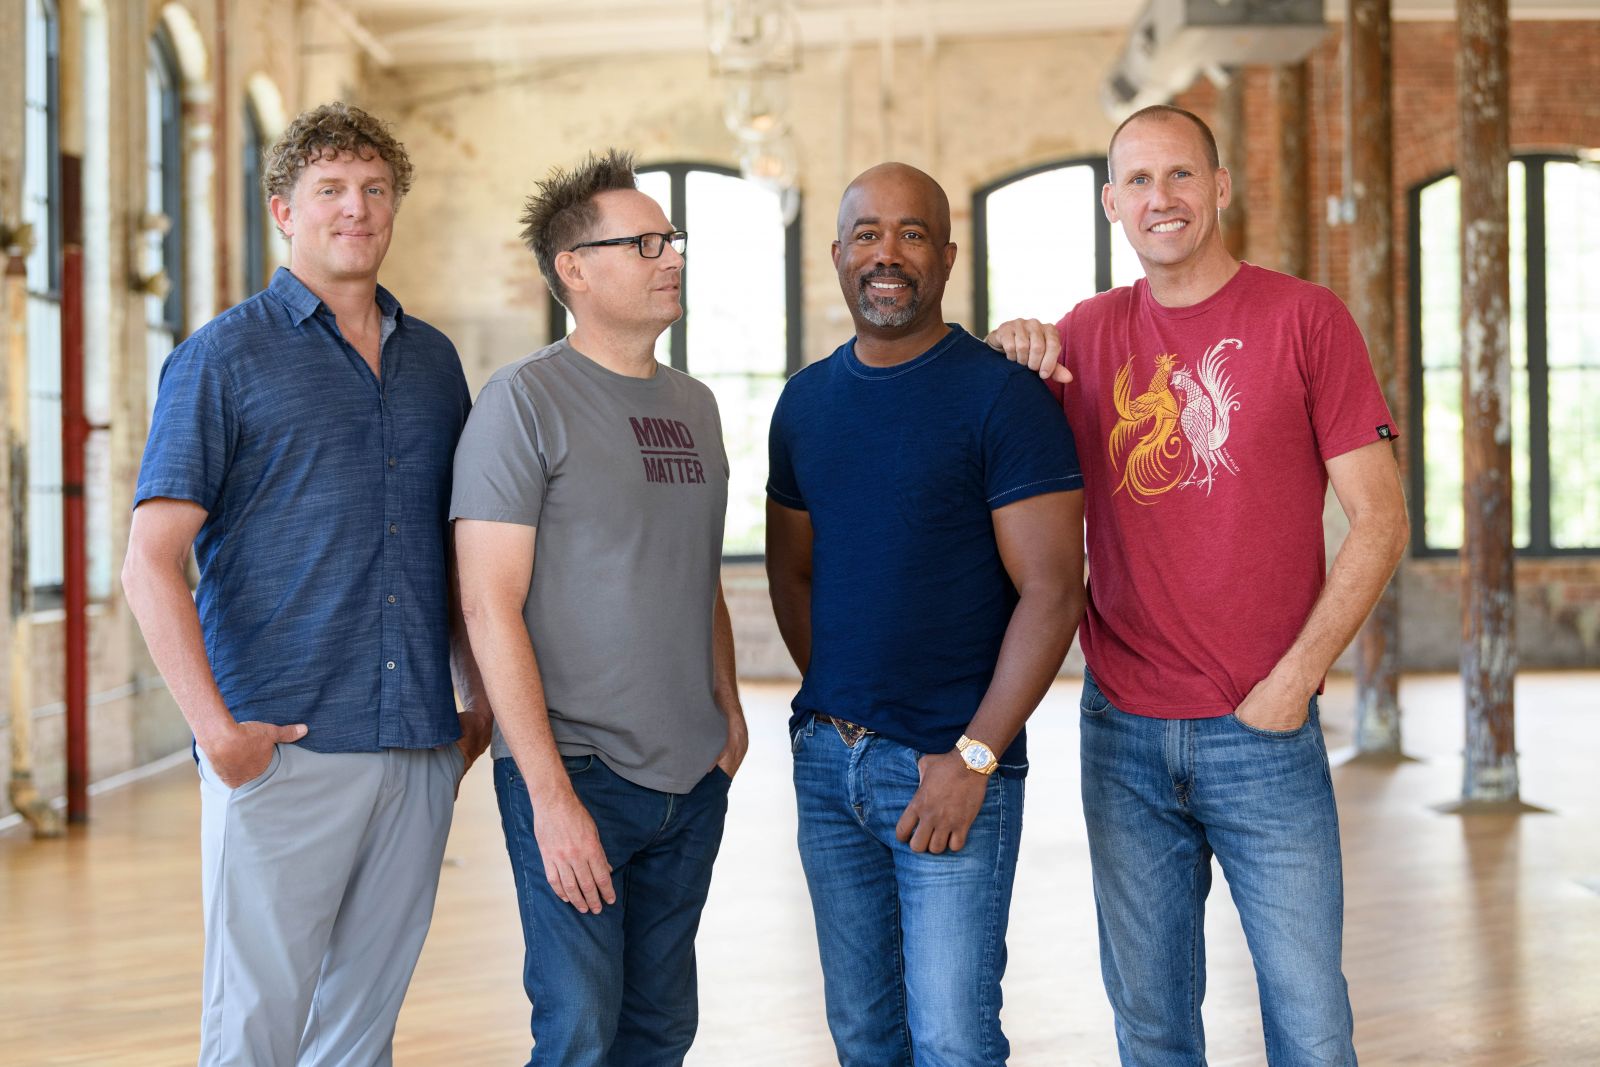  Hootie and the Blowfish will play three shows at Colonial Life Arena this week. (Photo/Courtesy of Todd & Chris Owyoung)